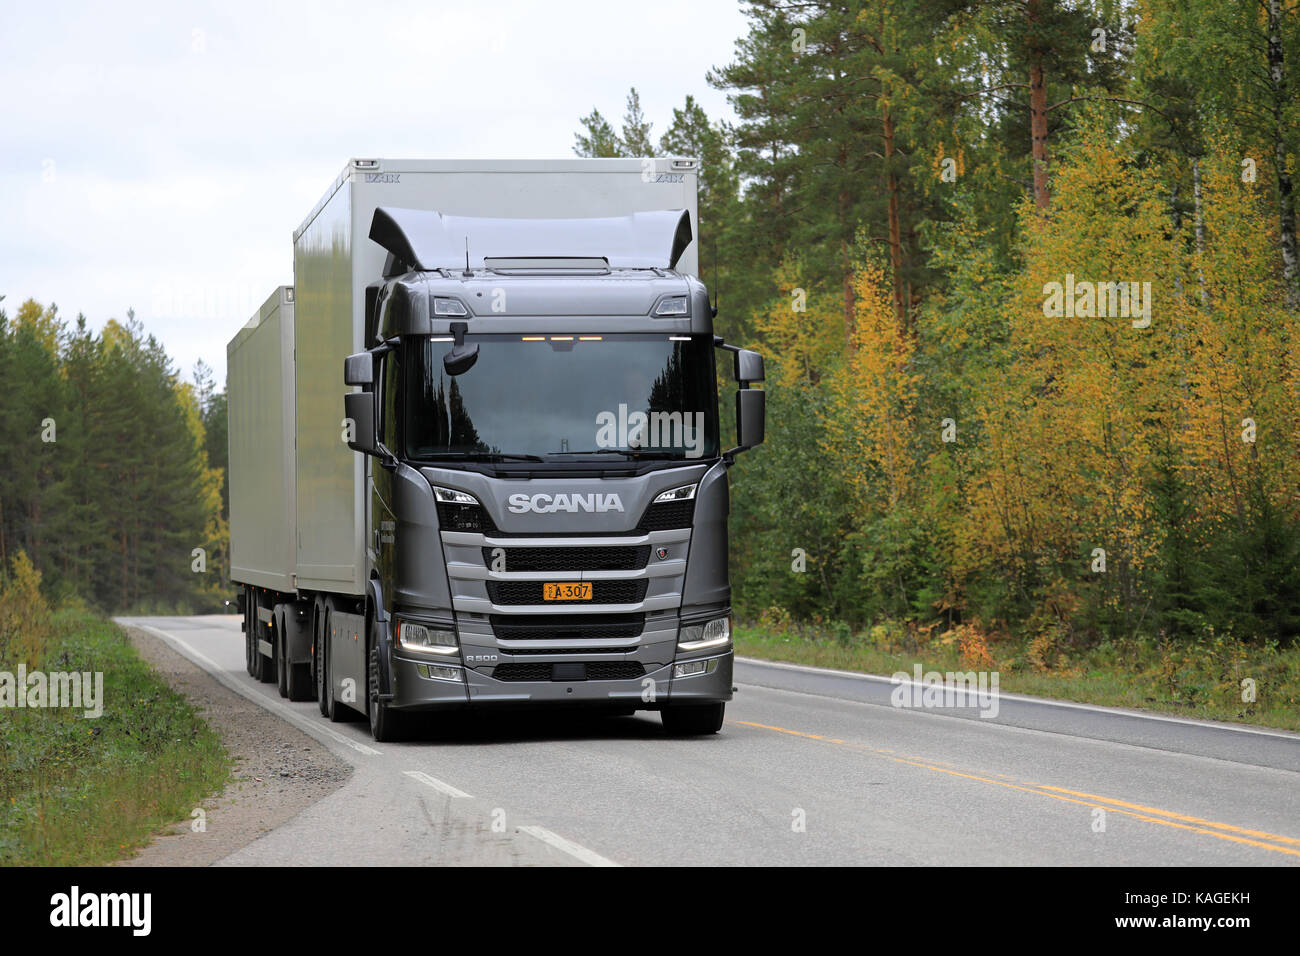 LAUKAA, FINLAND - SEPTEMBER 22, 2017: Silver Next Generation Scania R500 tractor trailer on a test drive along highway during Scania Laukaa Tupaswilla Stock Photo